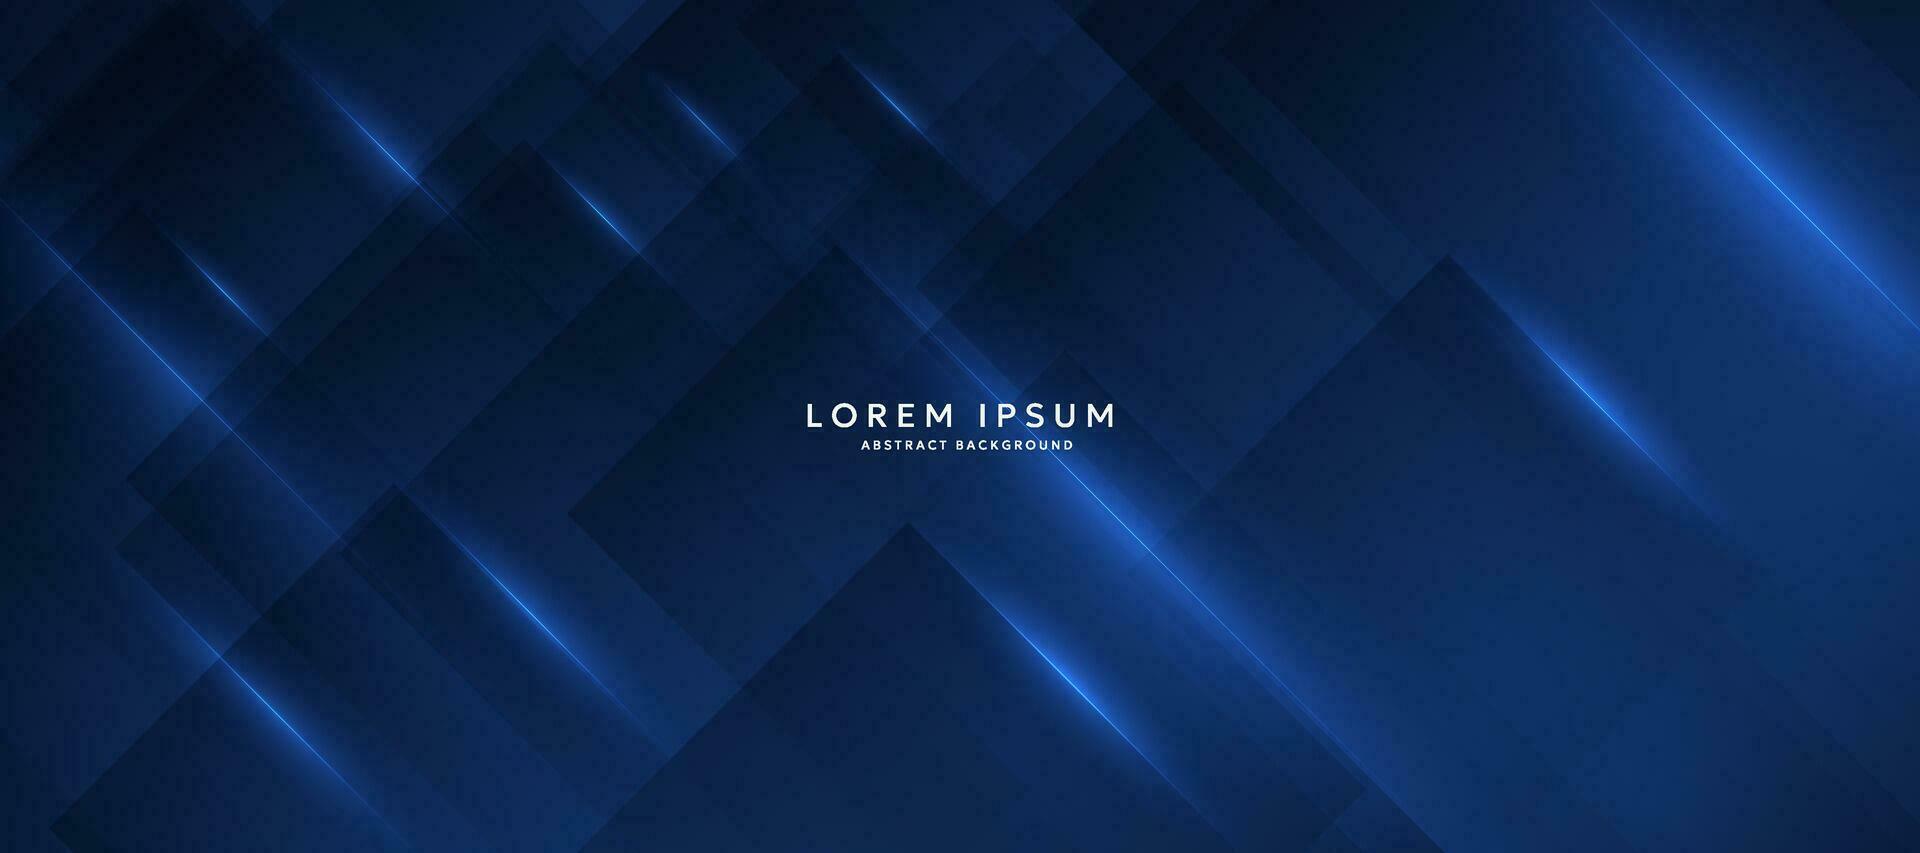 Abstract modern futuristic background vector illustration, square shapes with bright dark blue glow.